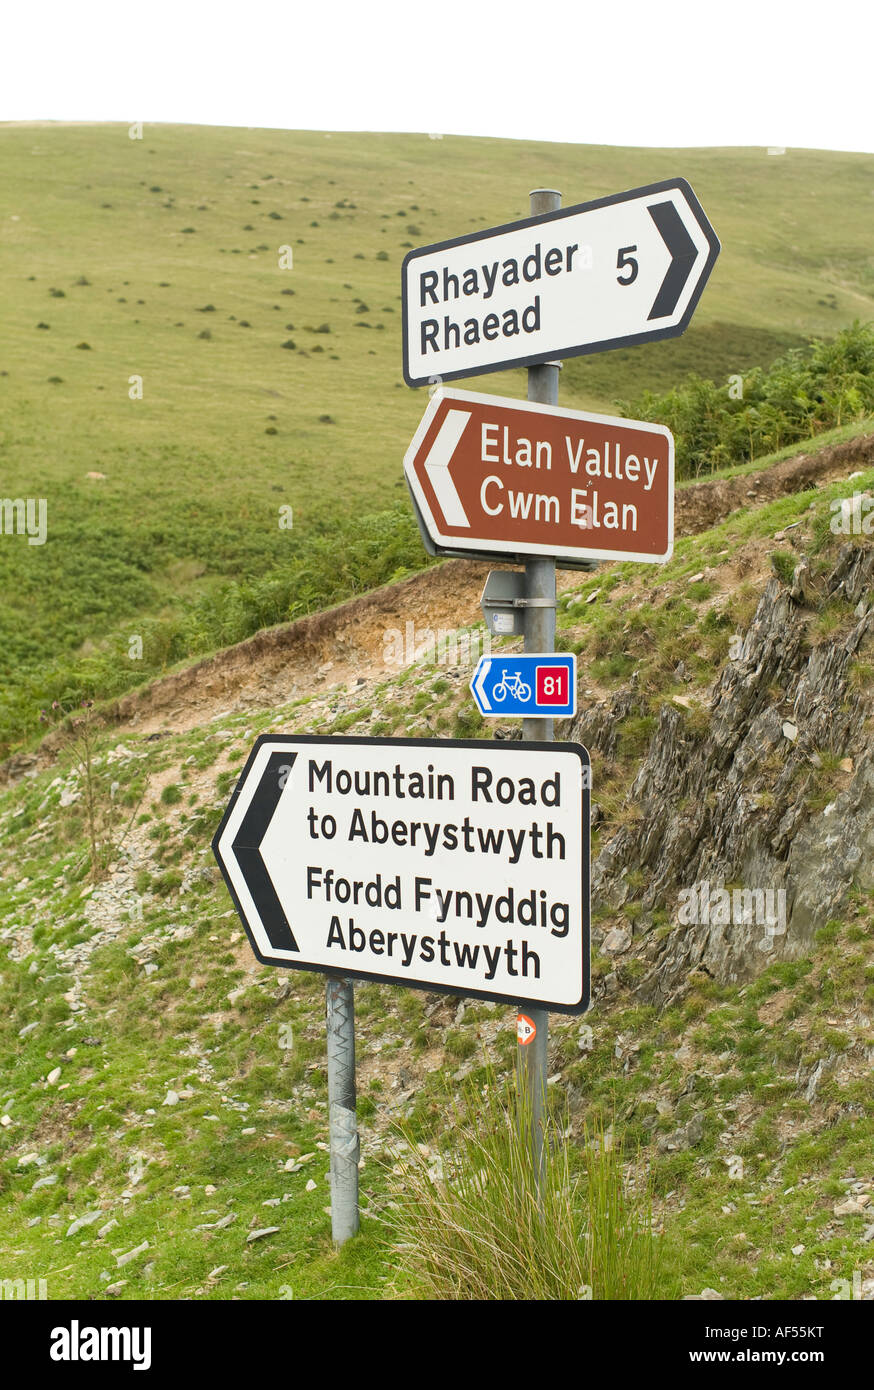 Powys The whole area i c2019 Photo 12x8 Road signs with biker near Elan Village 